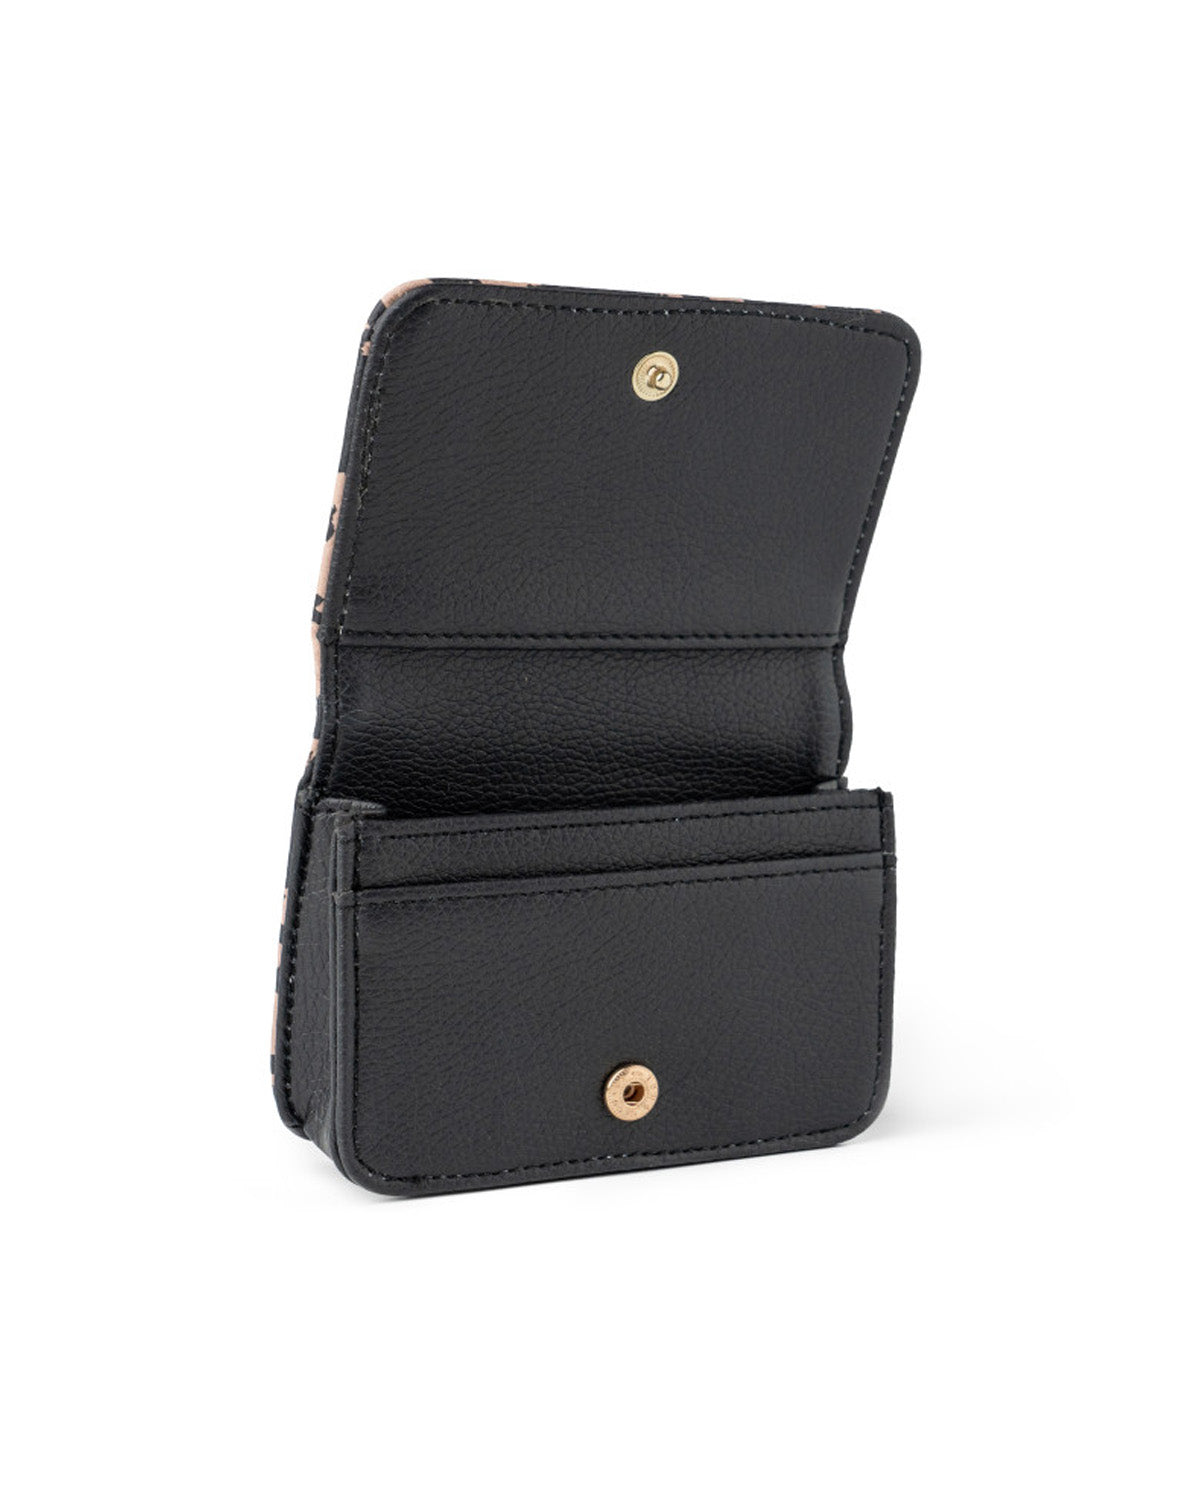 Cash & Card Only Wallets